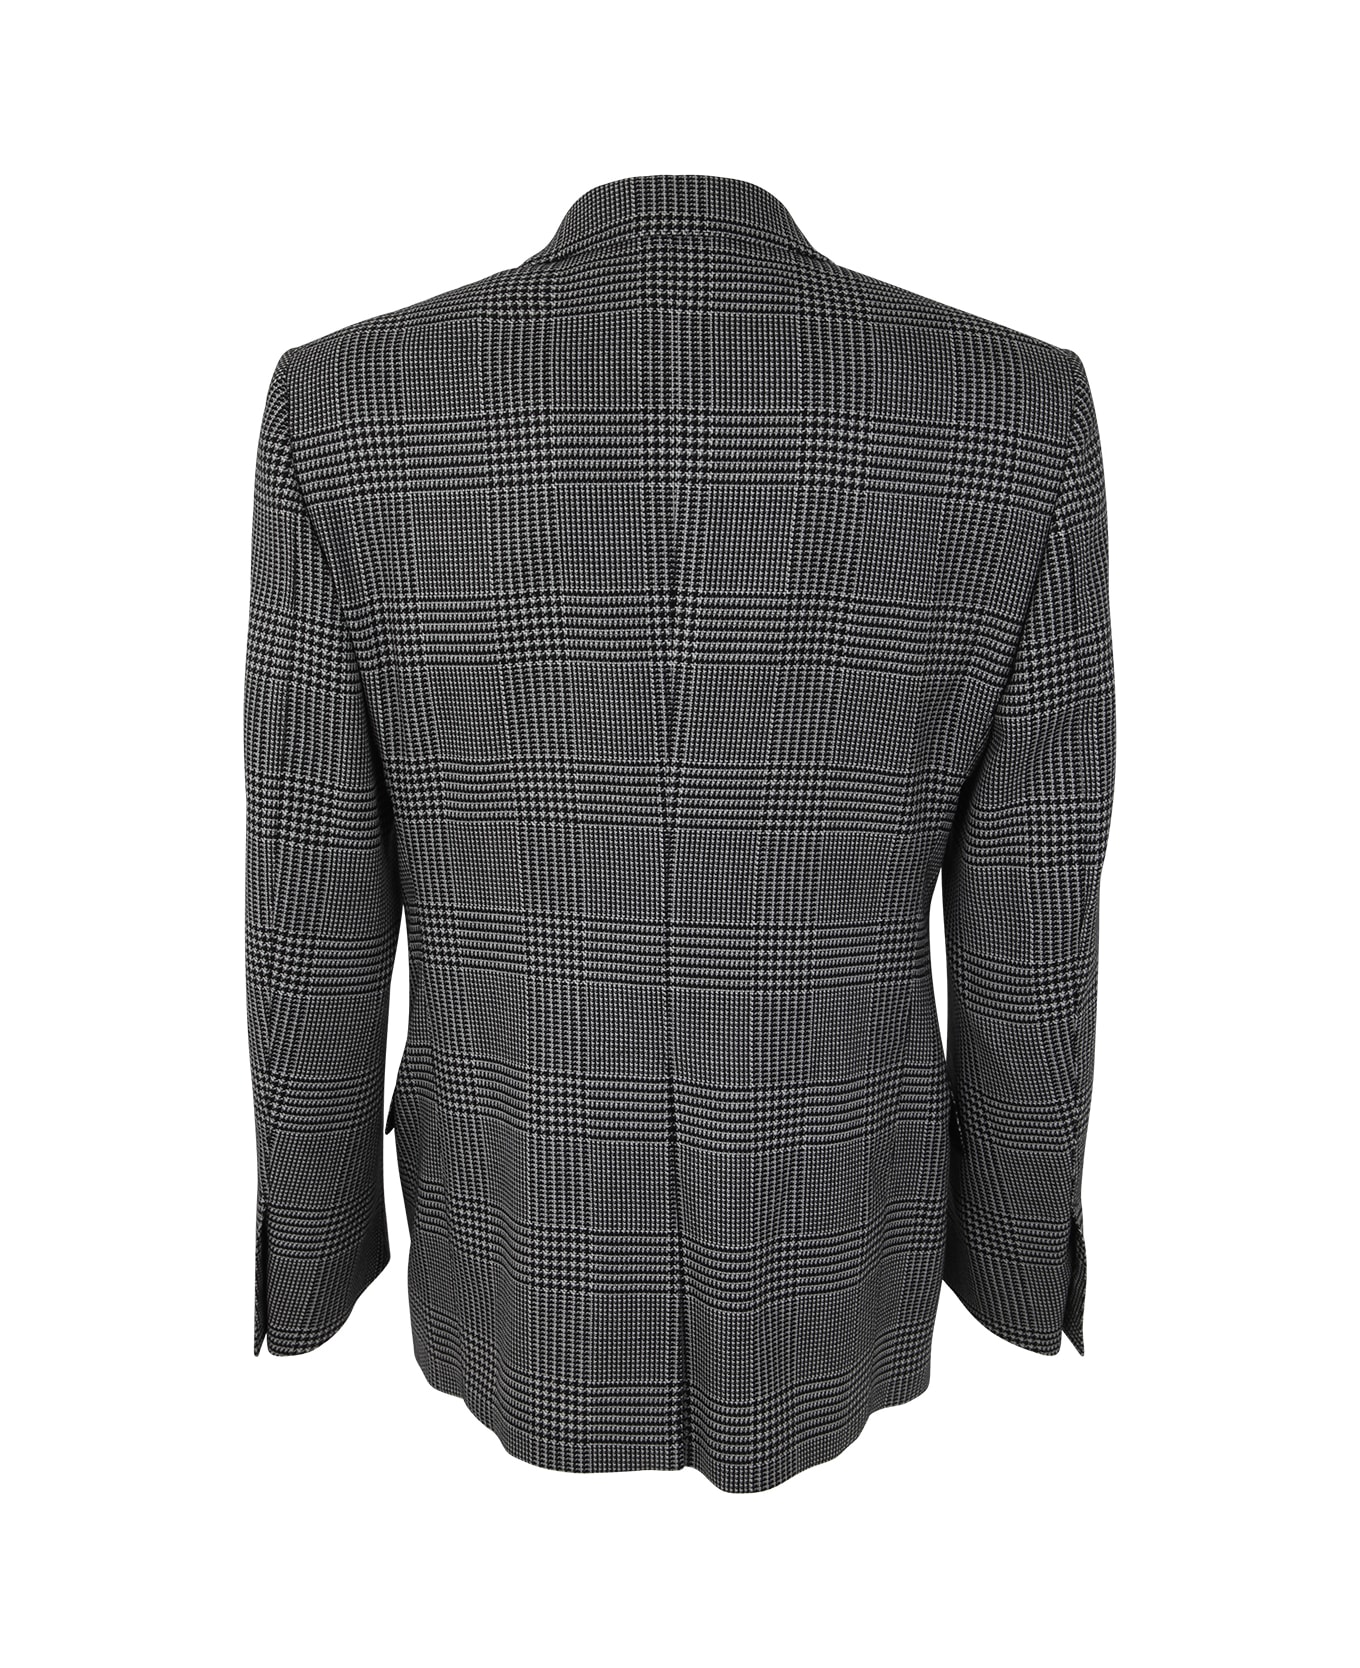 Tom Ford Single Breasted Jacket - Zlbaw Black White